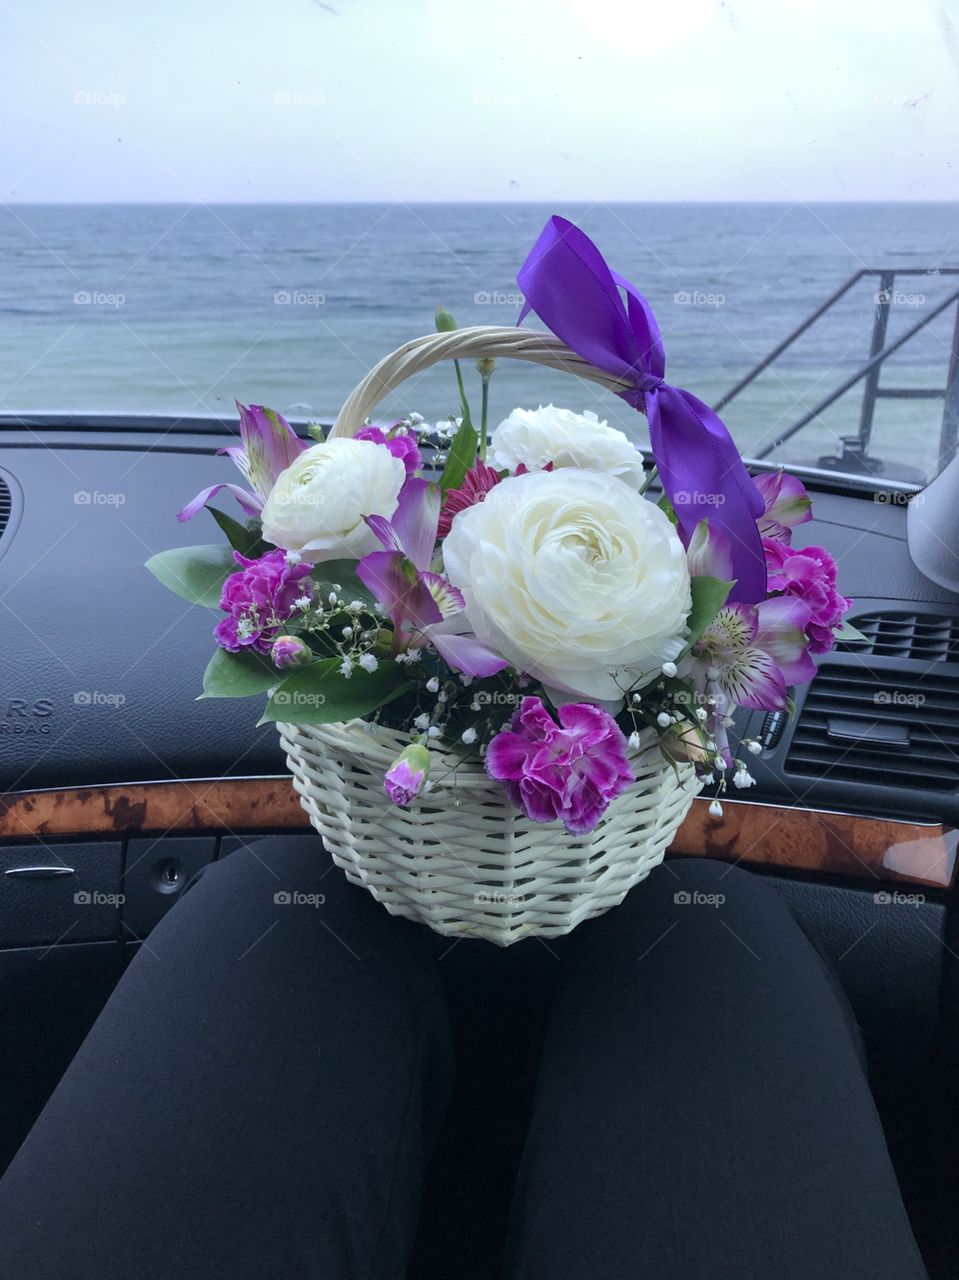 Sea and basket of flowers 